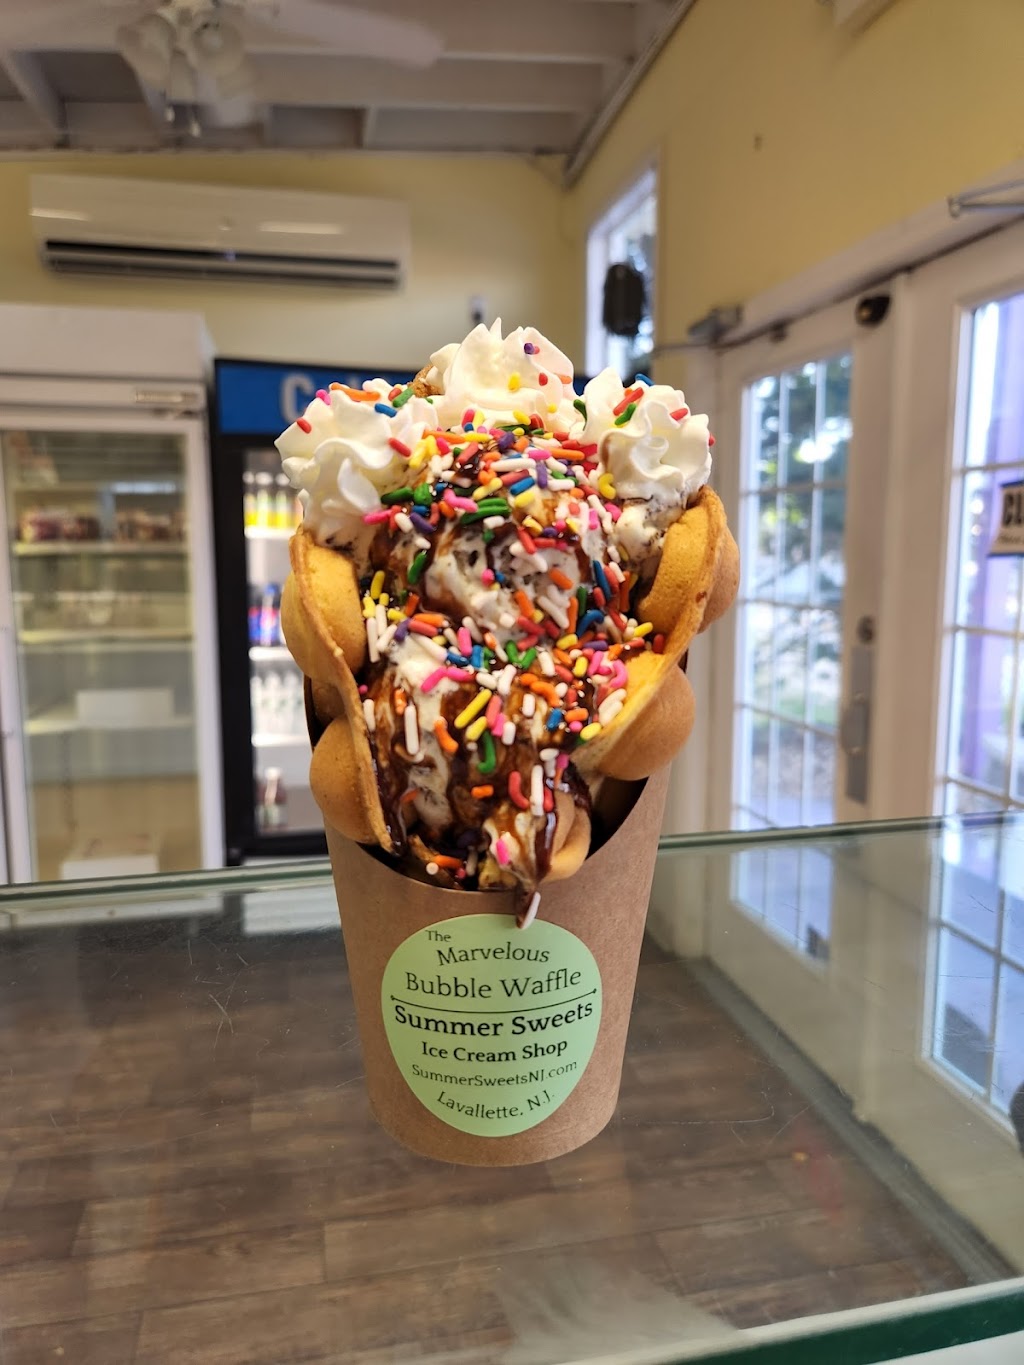 Summer Sweets Ice Cream Shop in Lavallette, NJ | 3071 Route 35 N, Grand Central Ave, Lavallette, NJ 08735 | Phone: (732) 830-3444